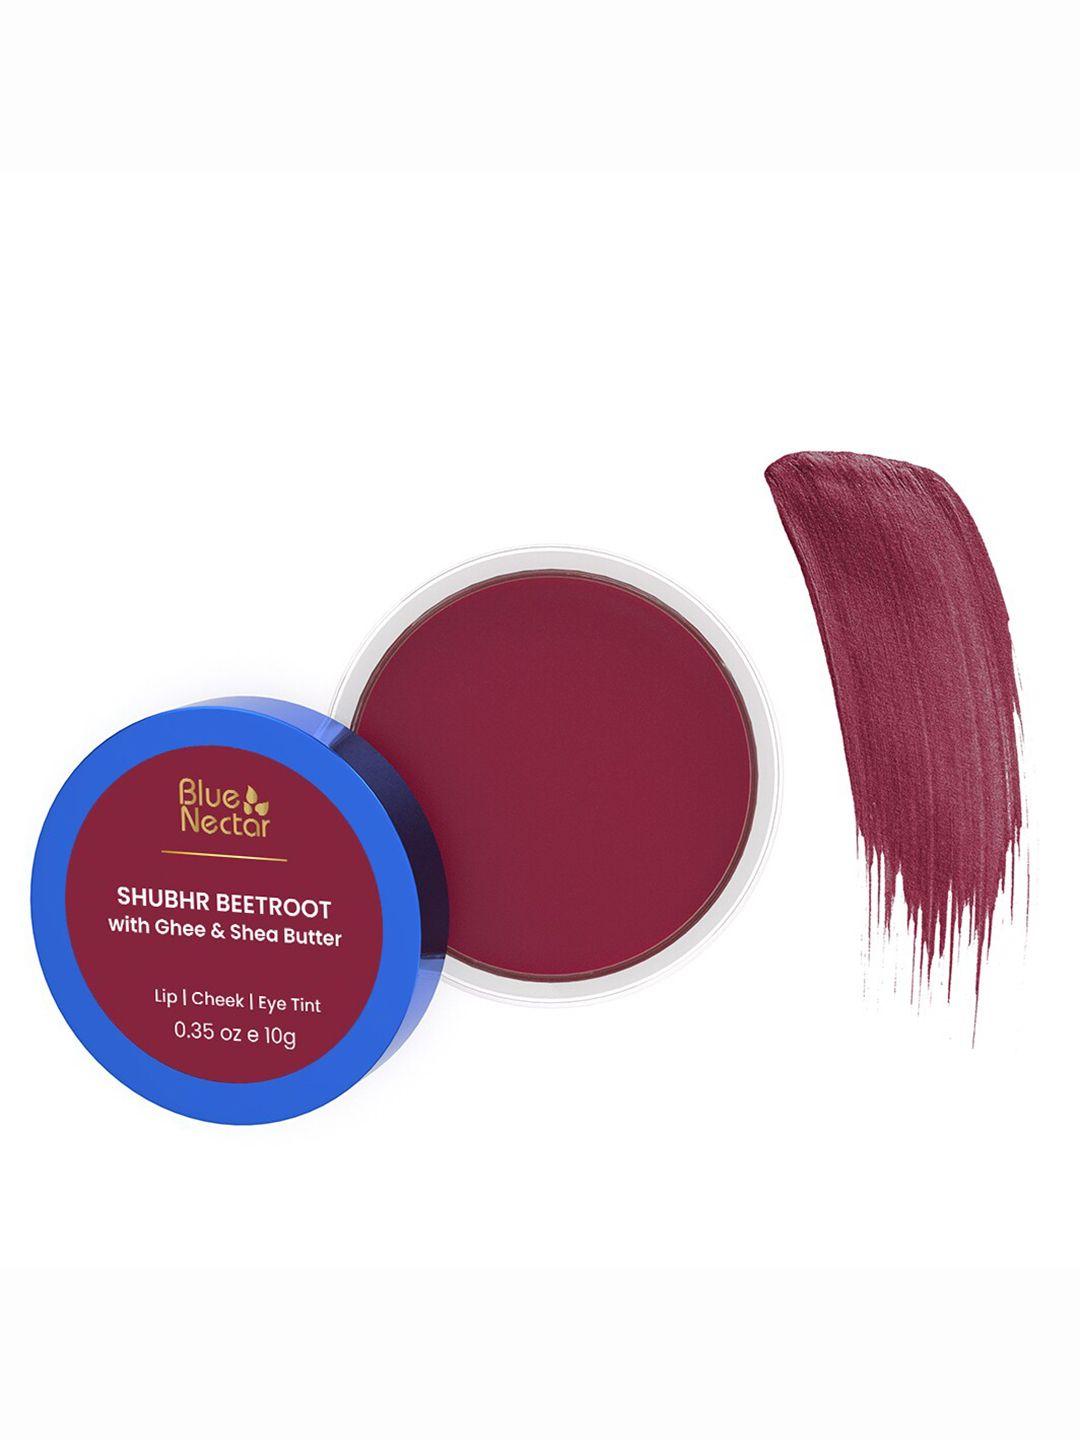 blue nectar shubhr beetroot lip & cheek tint with ghee & shea butter-10gm - beetroot red